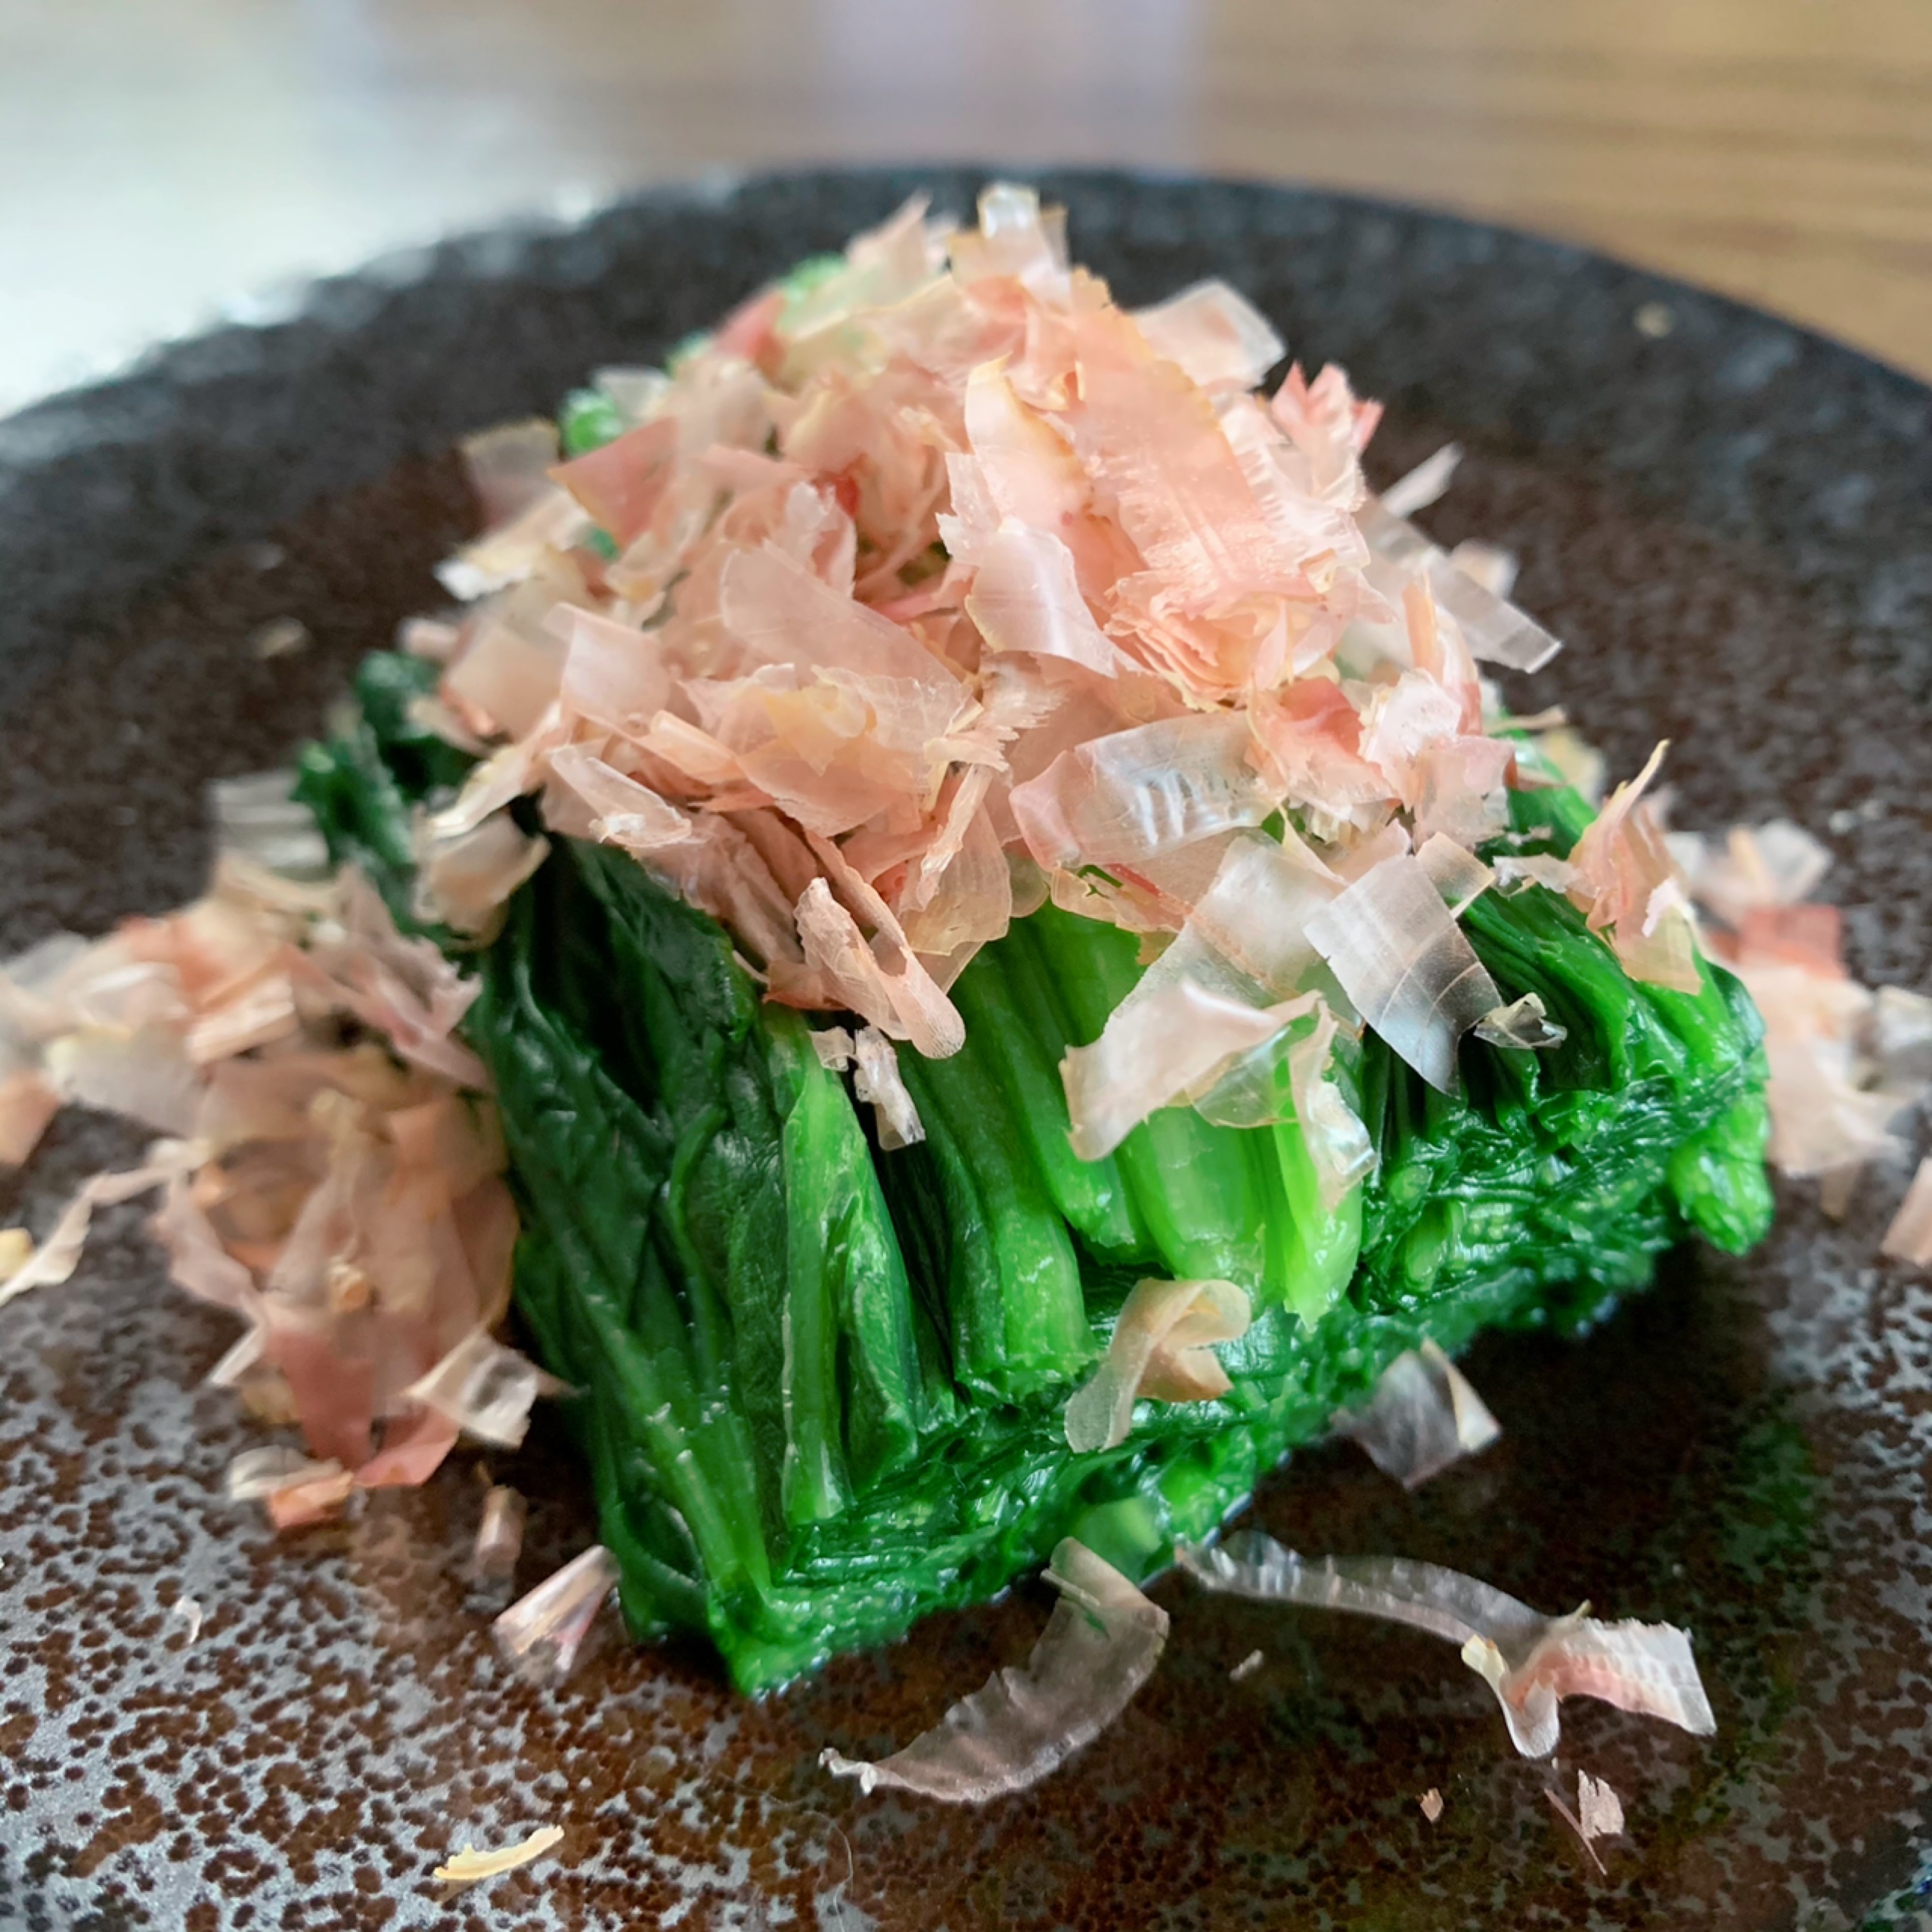 Spinach soaked in dashi soup and topped with bonito flakes.